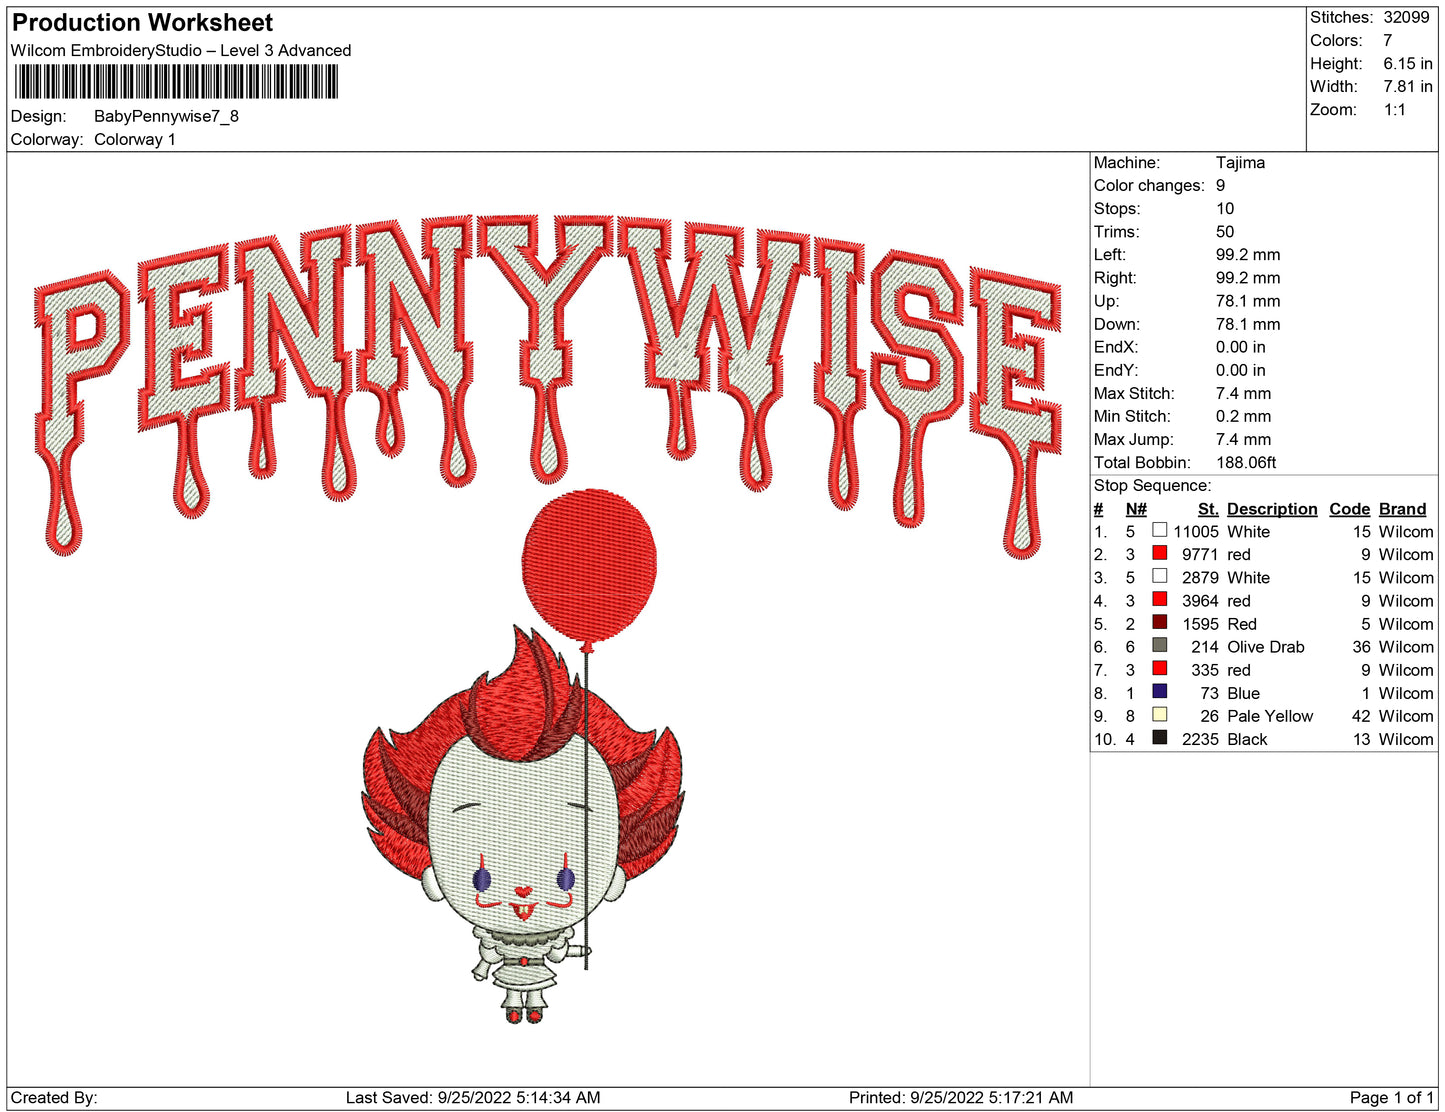 Baby Pennywise